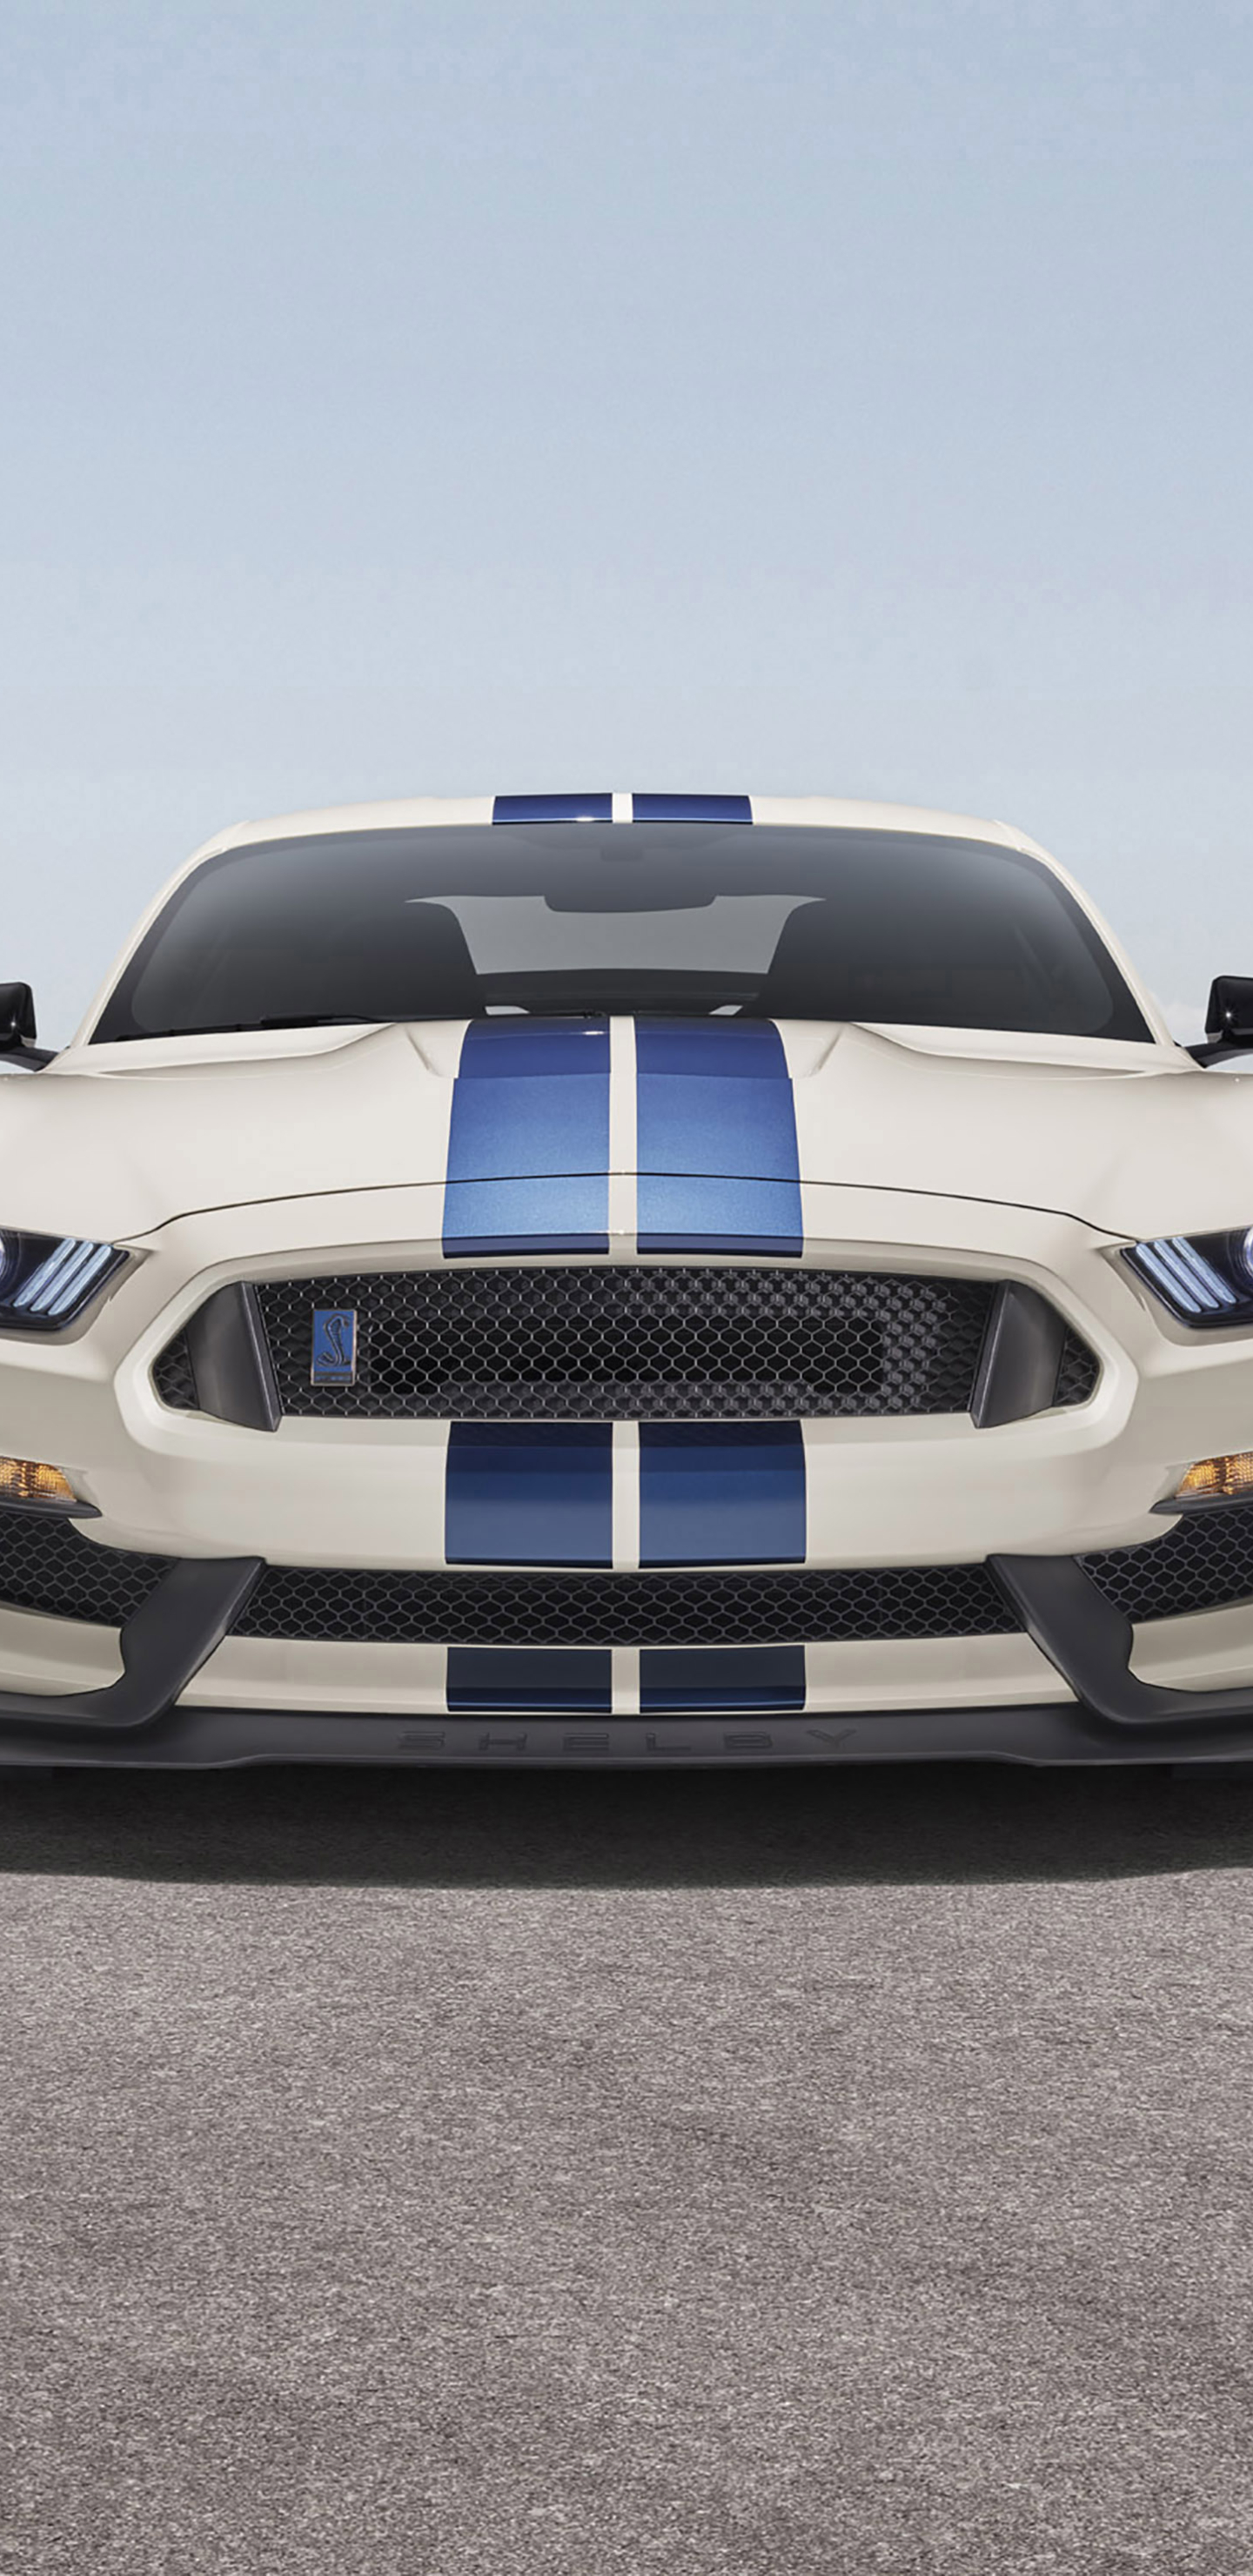 1440x2960 Ford Mustang Shelby Gt350 Samsung Galaxy Note 9 8 S9 S8 S8 Qhd Wallpaper Hd Cars 4k Wallpapers Images Photos And Background Wallpapers Den